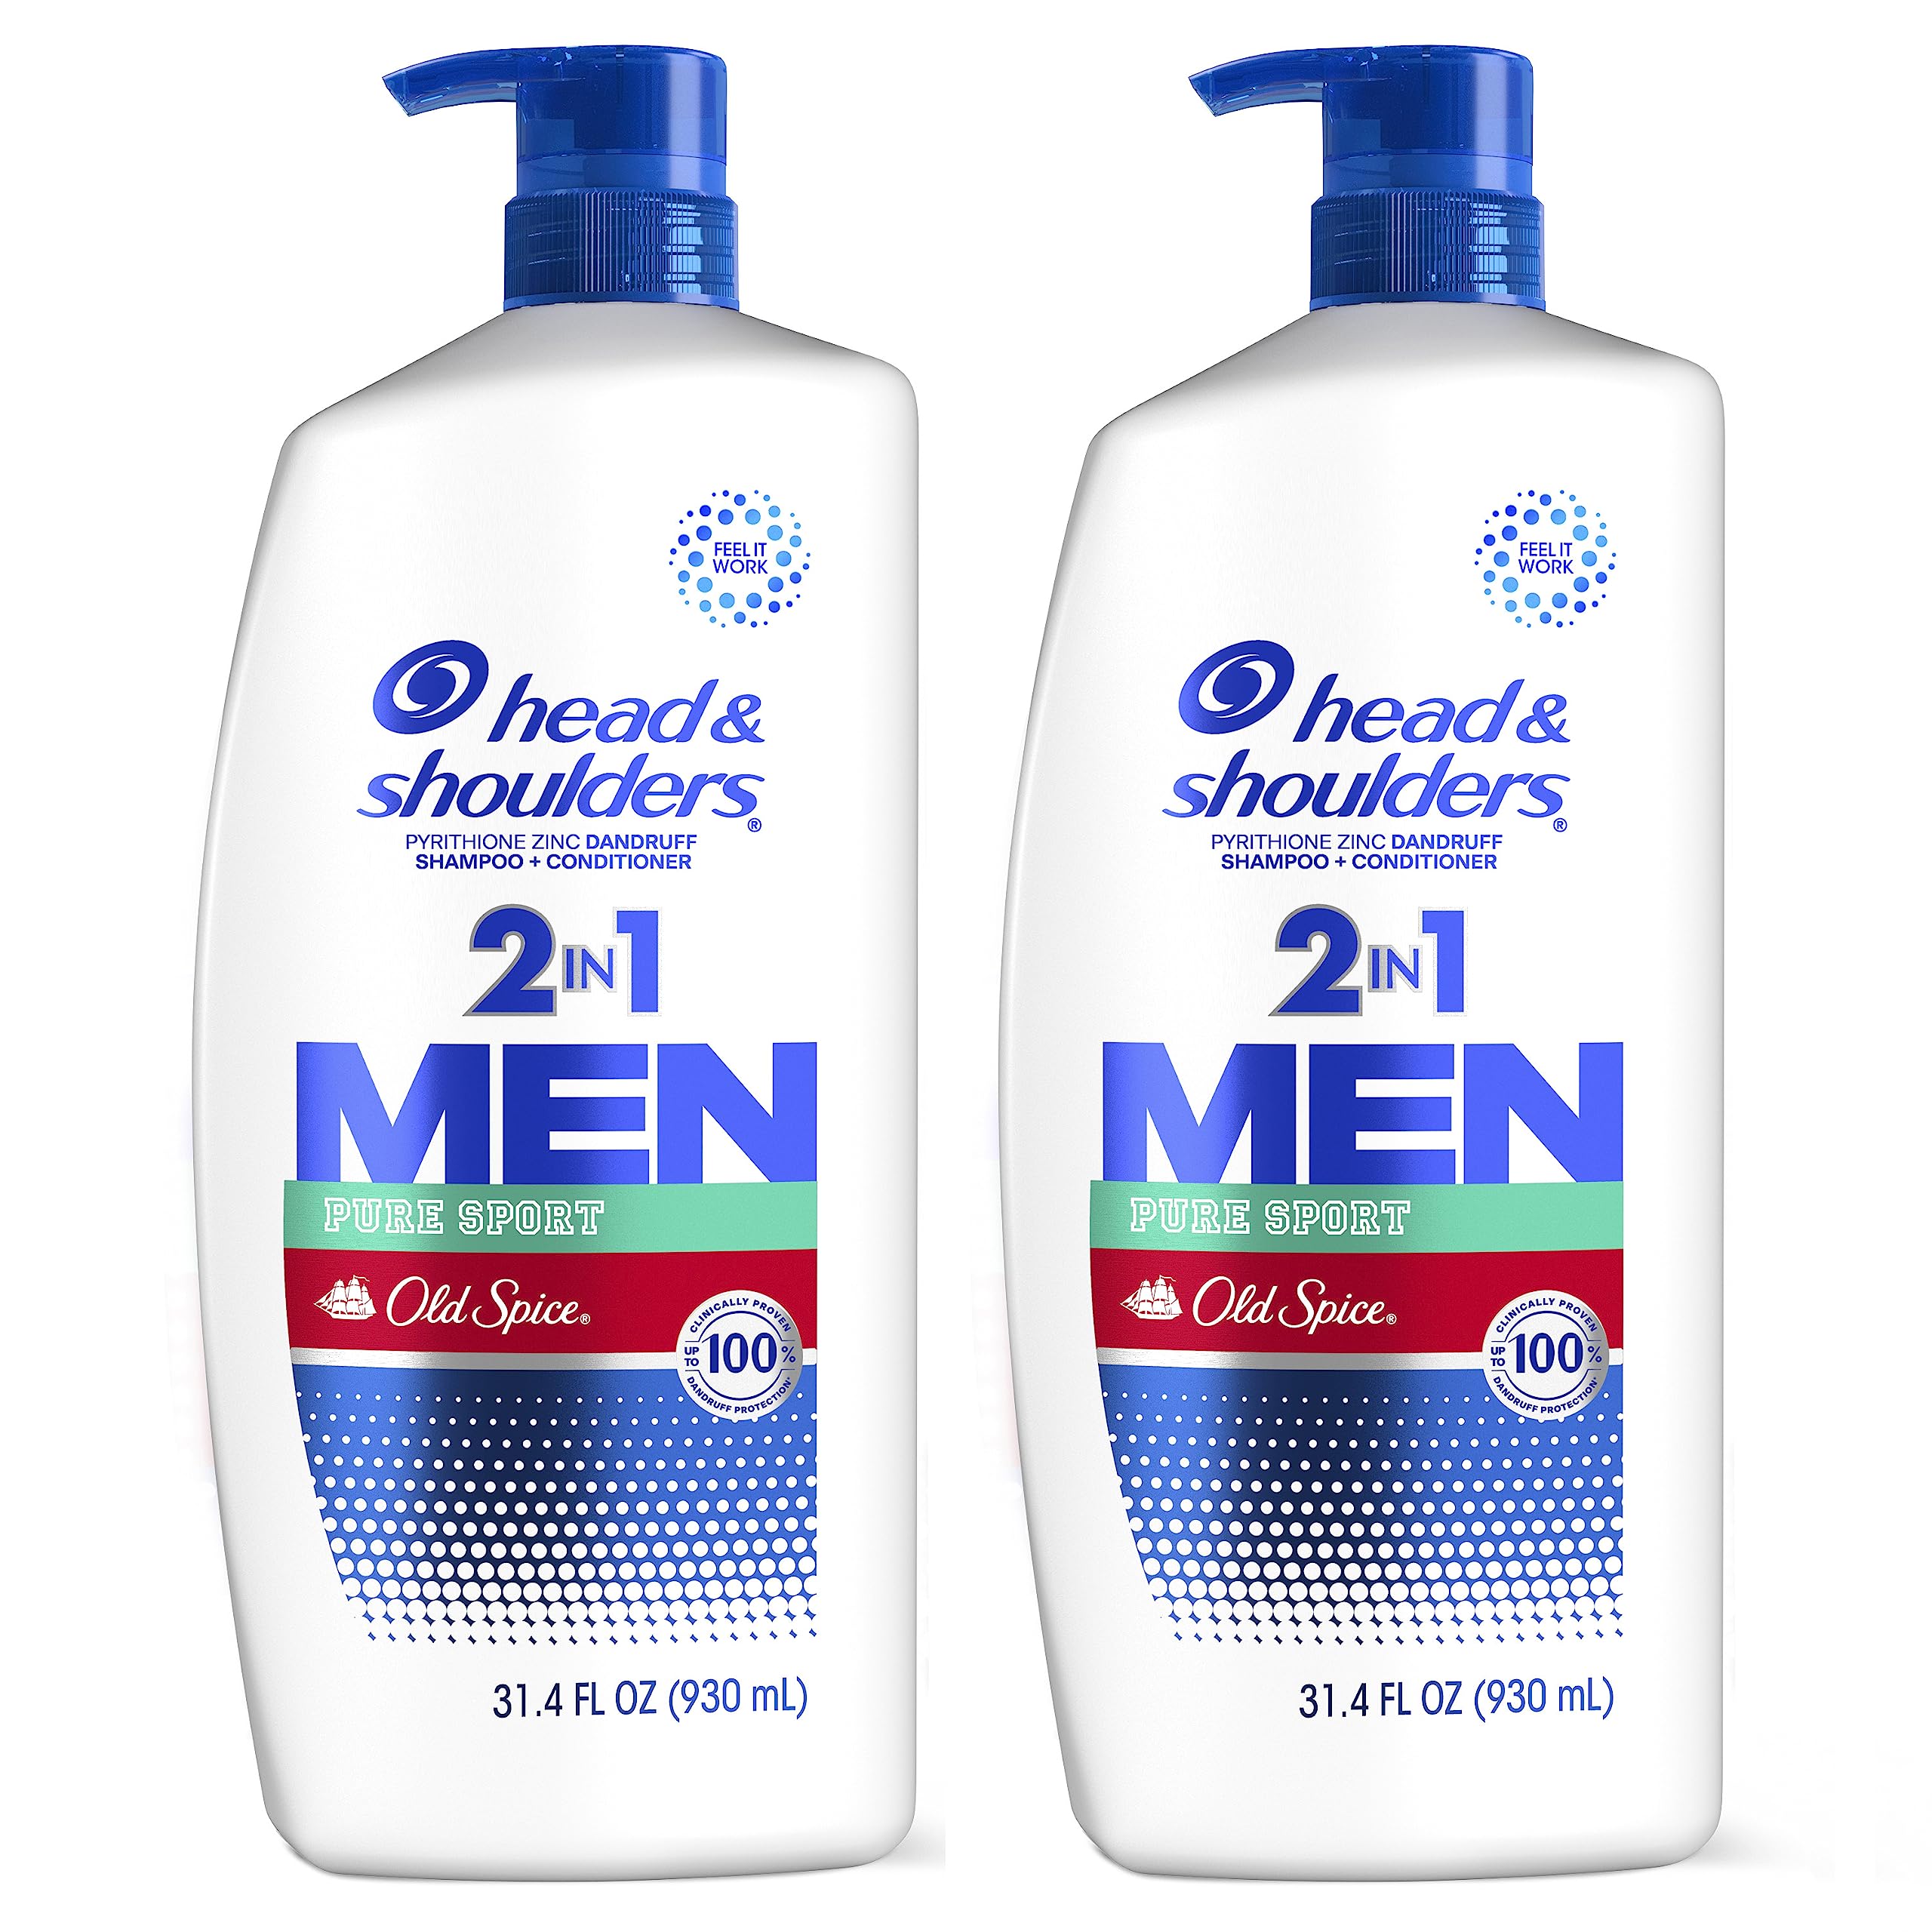 Head & Shoulders 2-in-1 Dandruff Shampoo and Conditioner, Lemon-Lime Scent of Old Spice Pure Sport, 31.4 Fl Oz Each, 2 Pack - $19.86